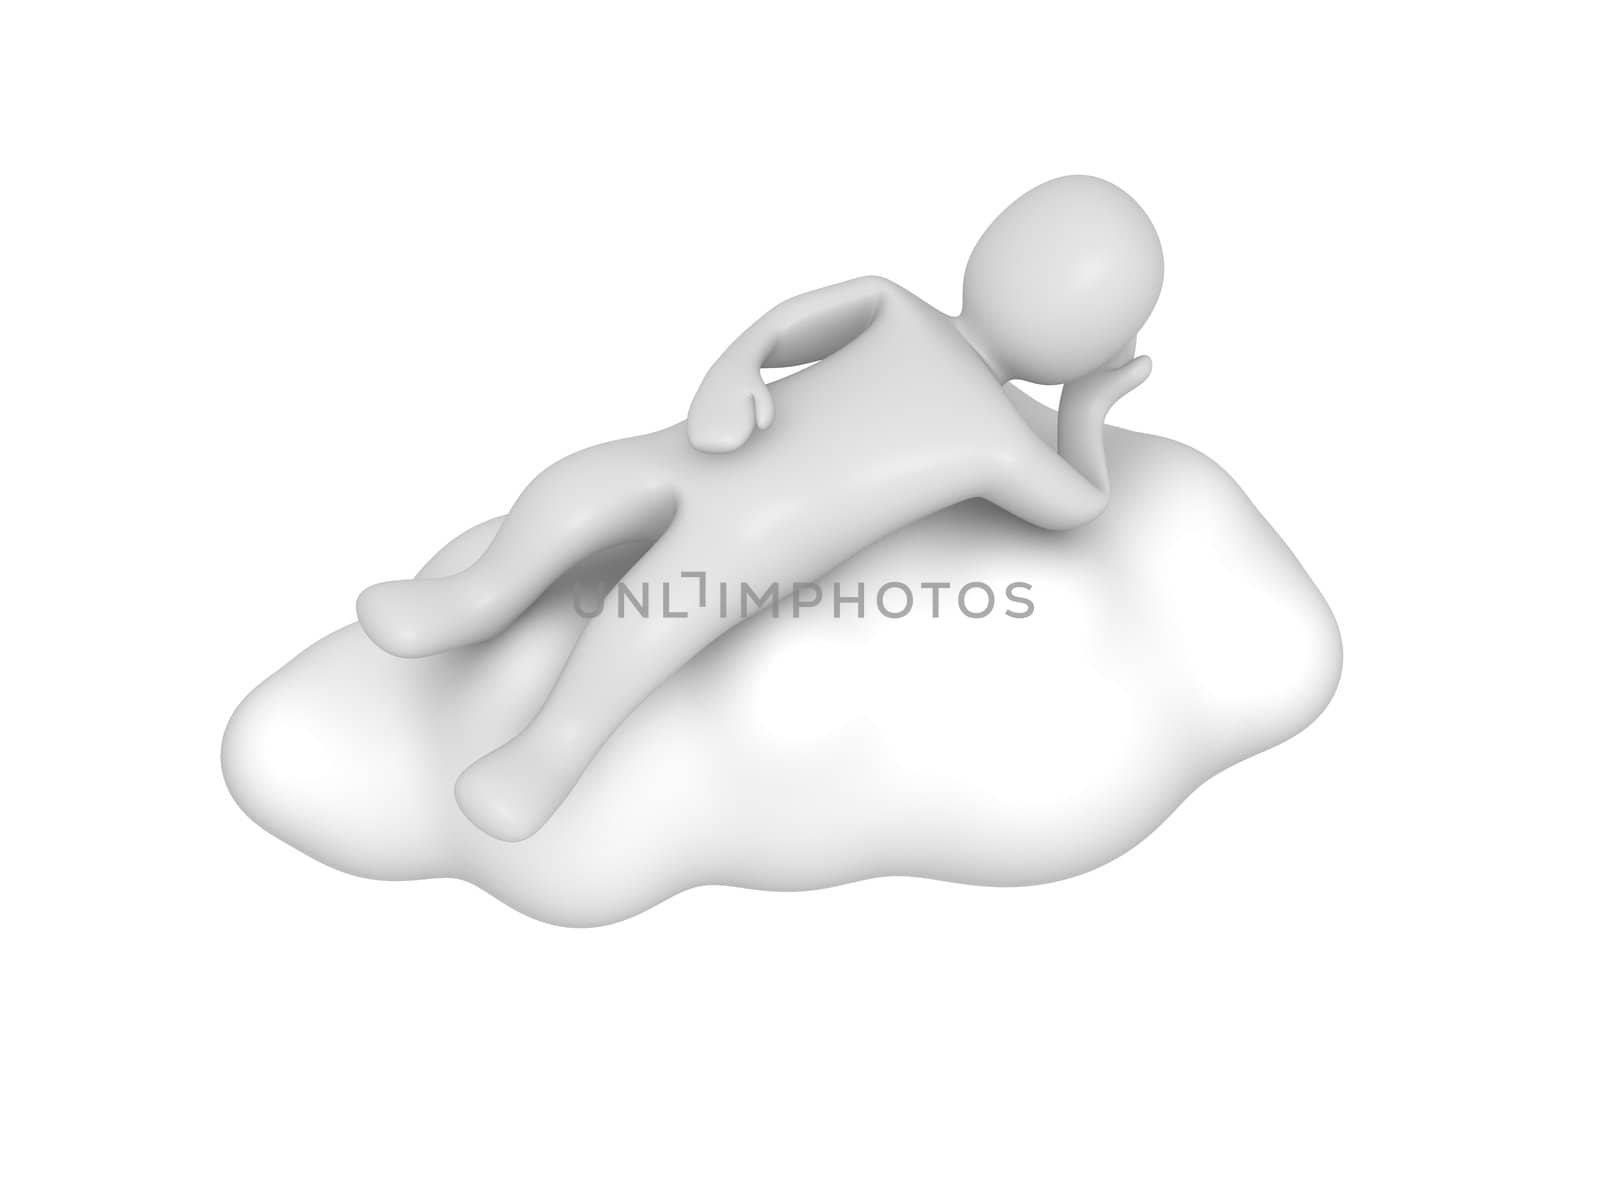 Man lying on cloud. 3d rendered illustration isolated on white.